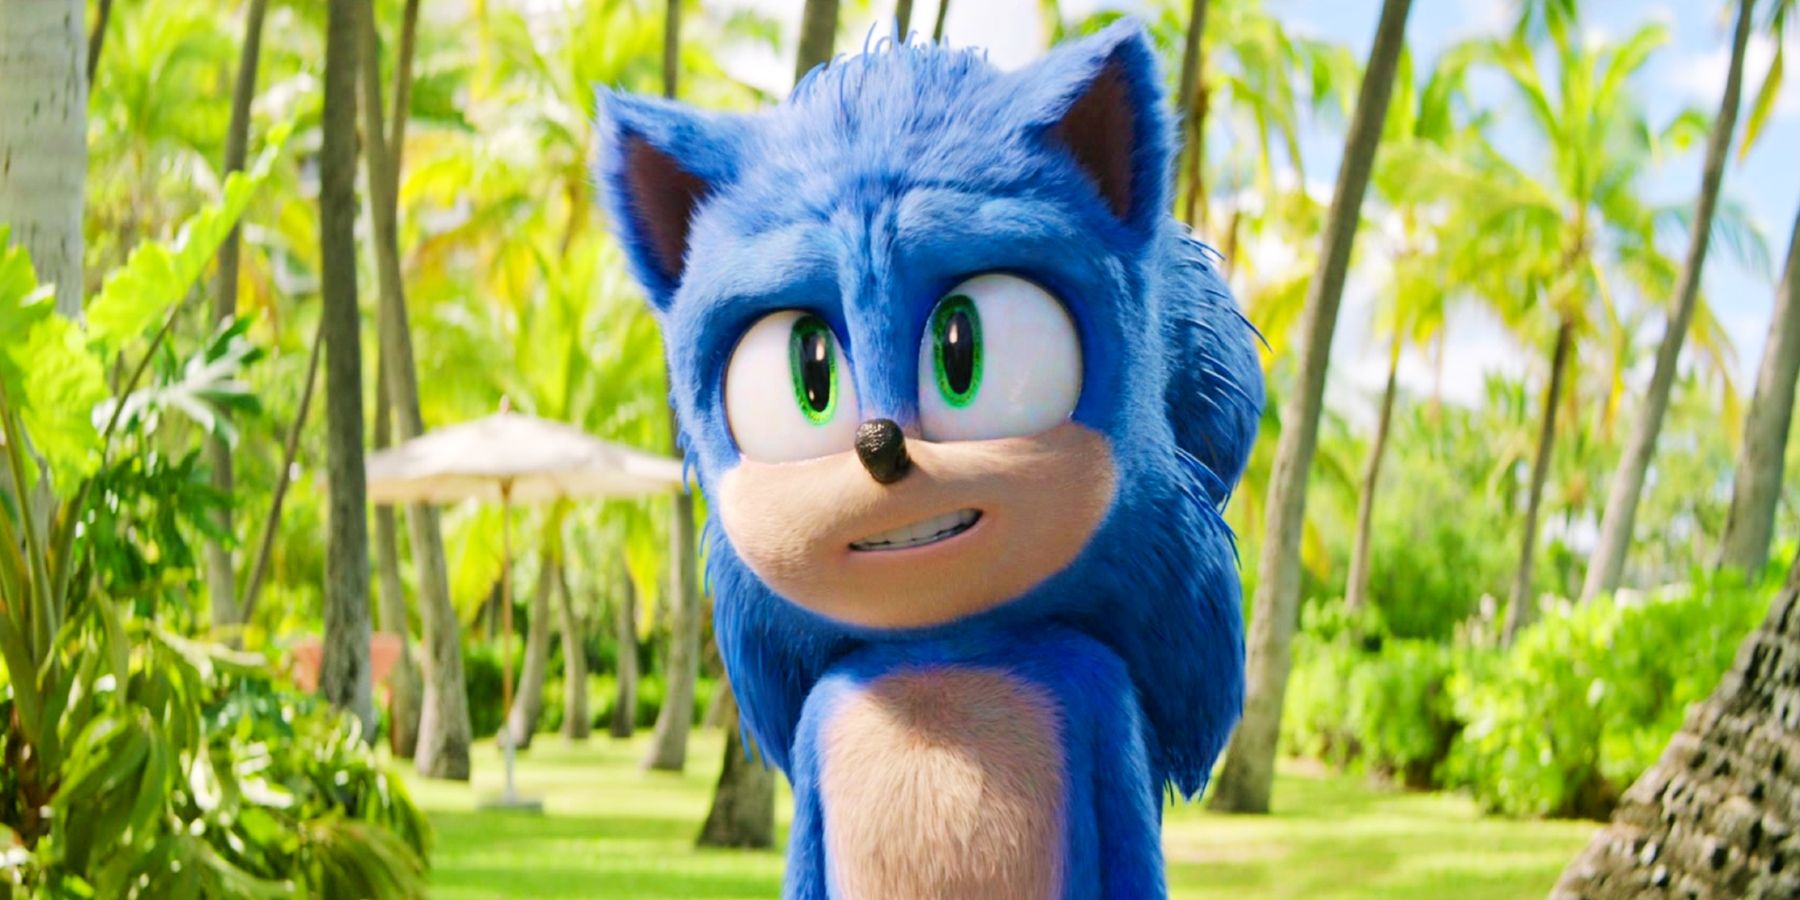 Sonic smiling in a tropical setting in Sonic the Hedgehog 2